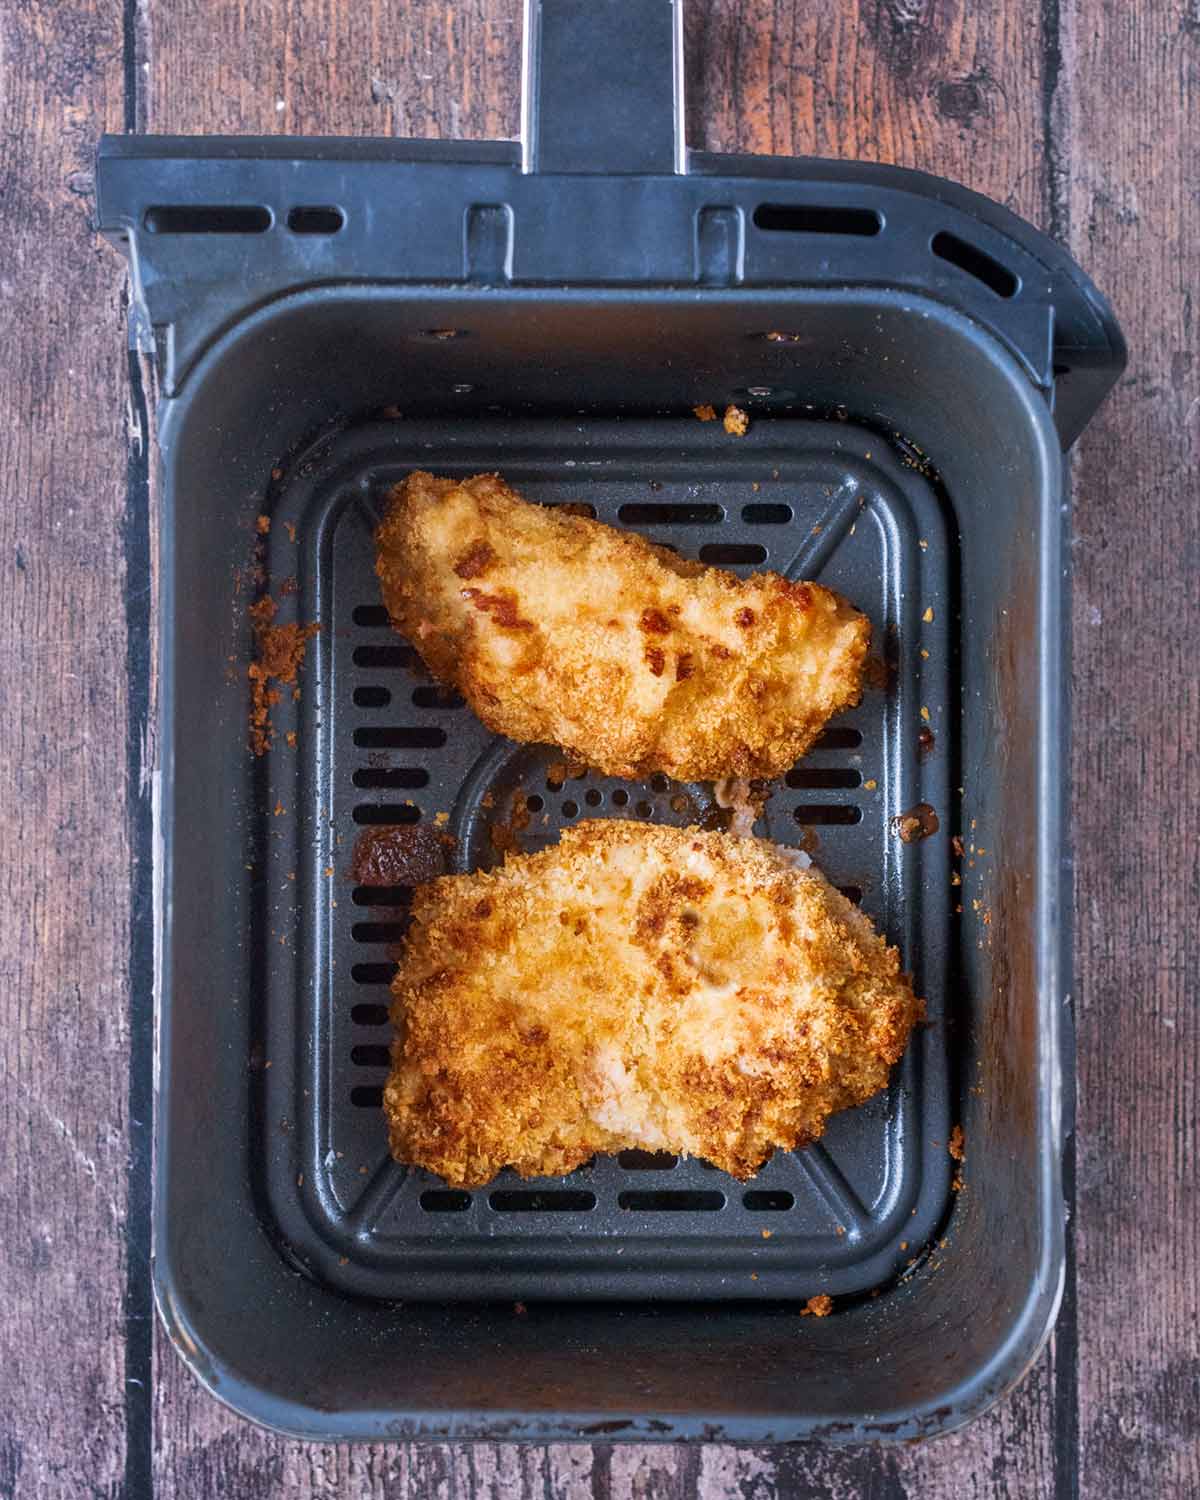 Cooked breaded chicken breasts in an air fryer basket.